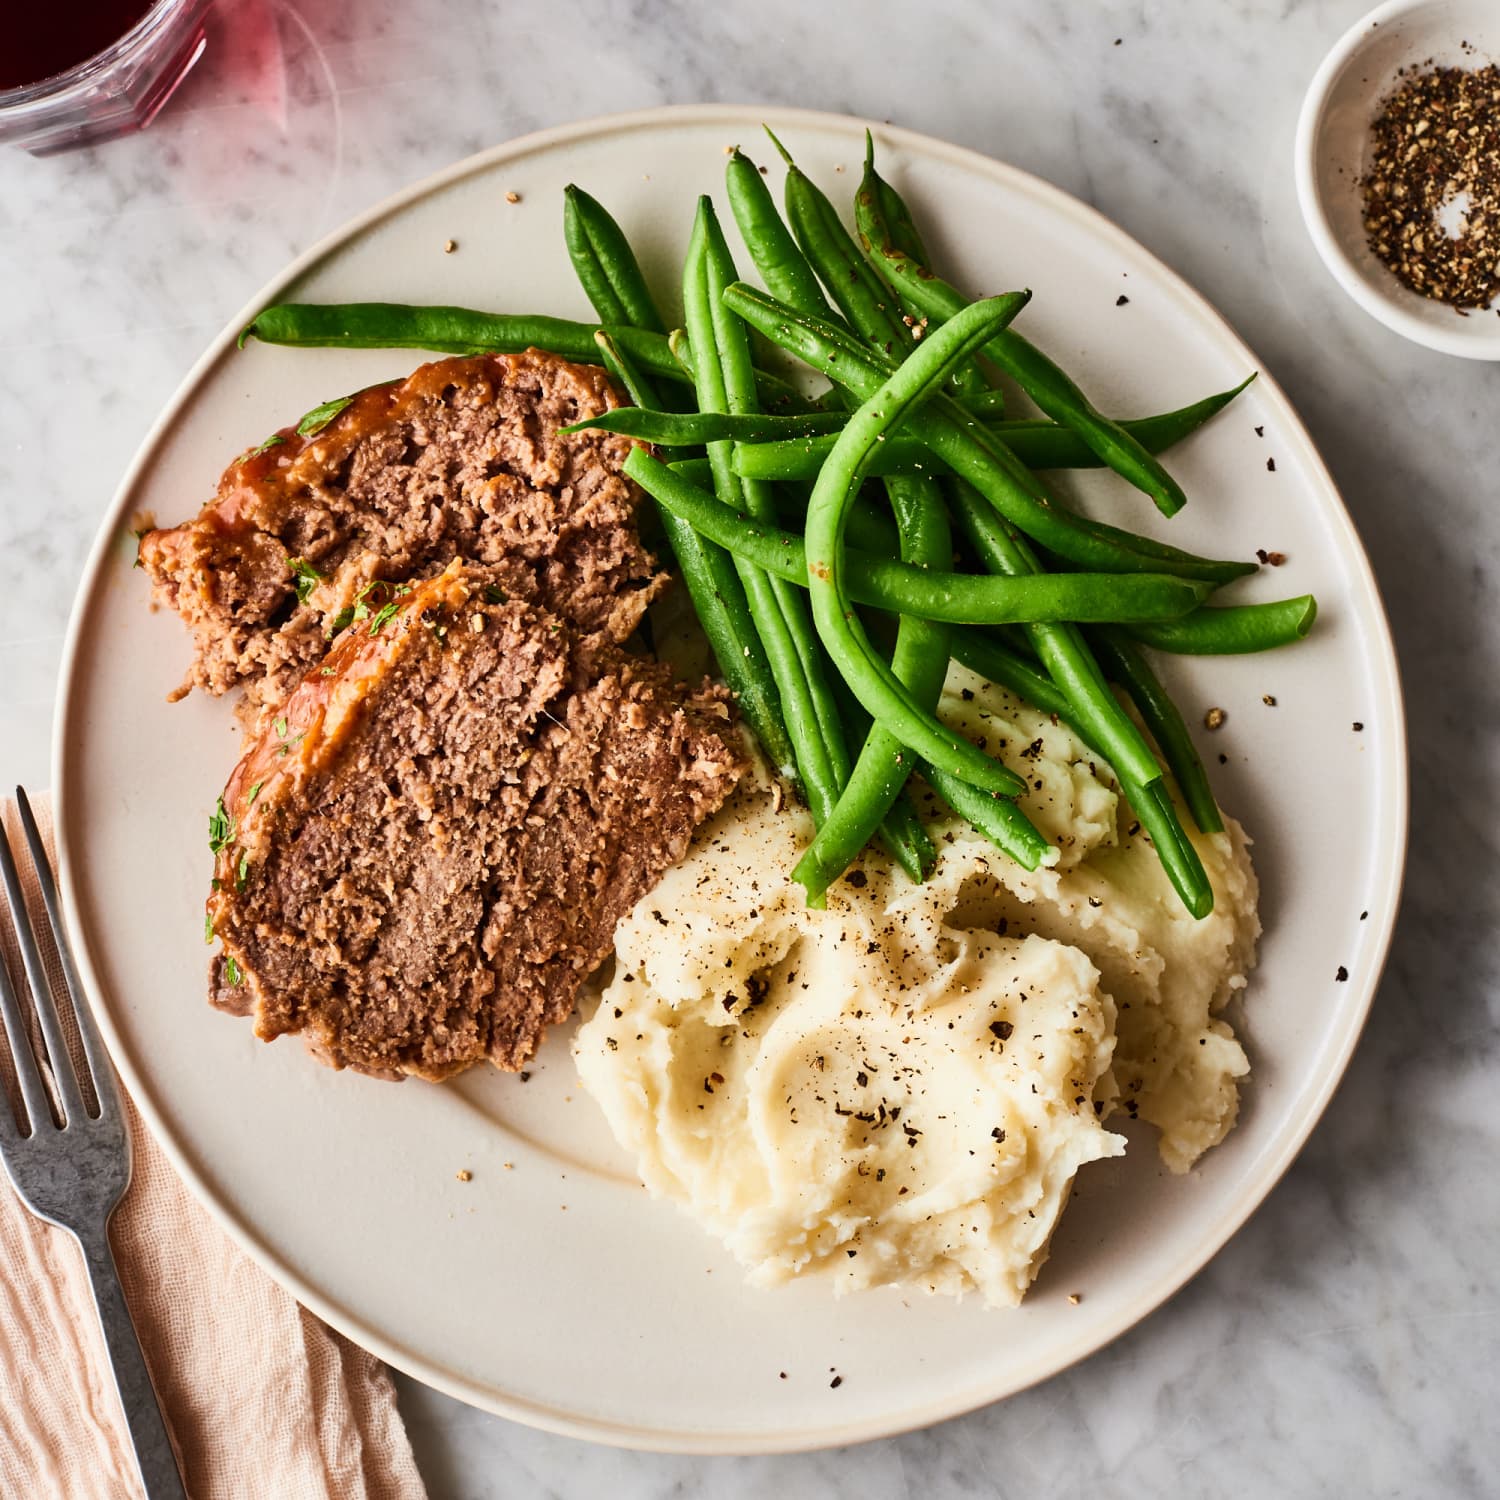 What Vegetables Go Good With Meatloaf